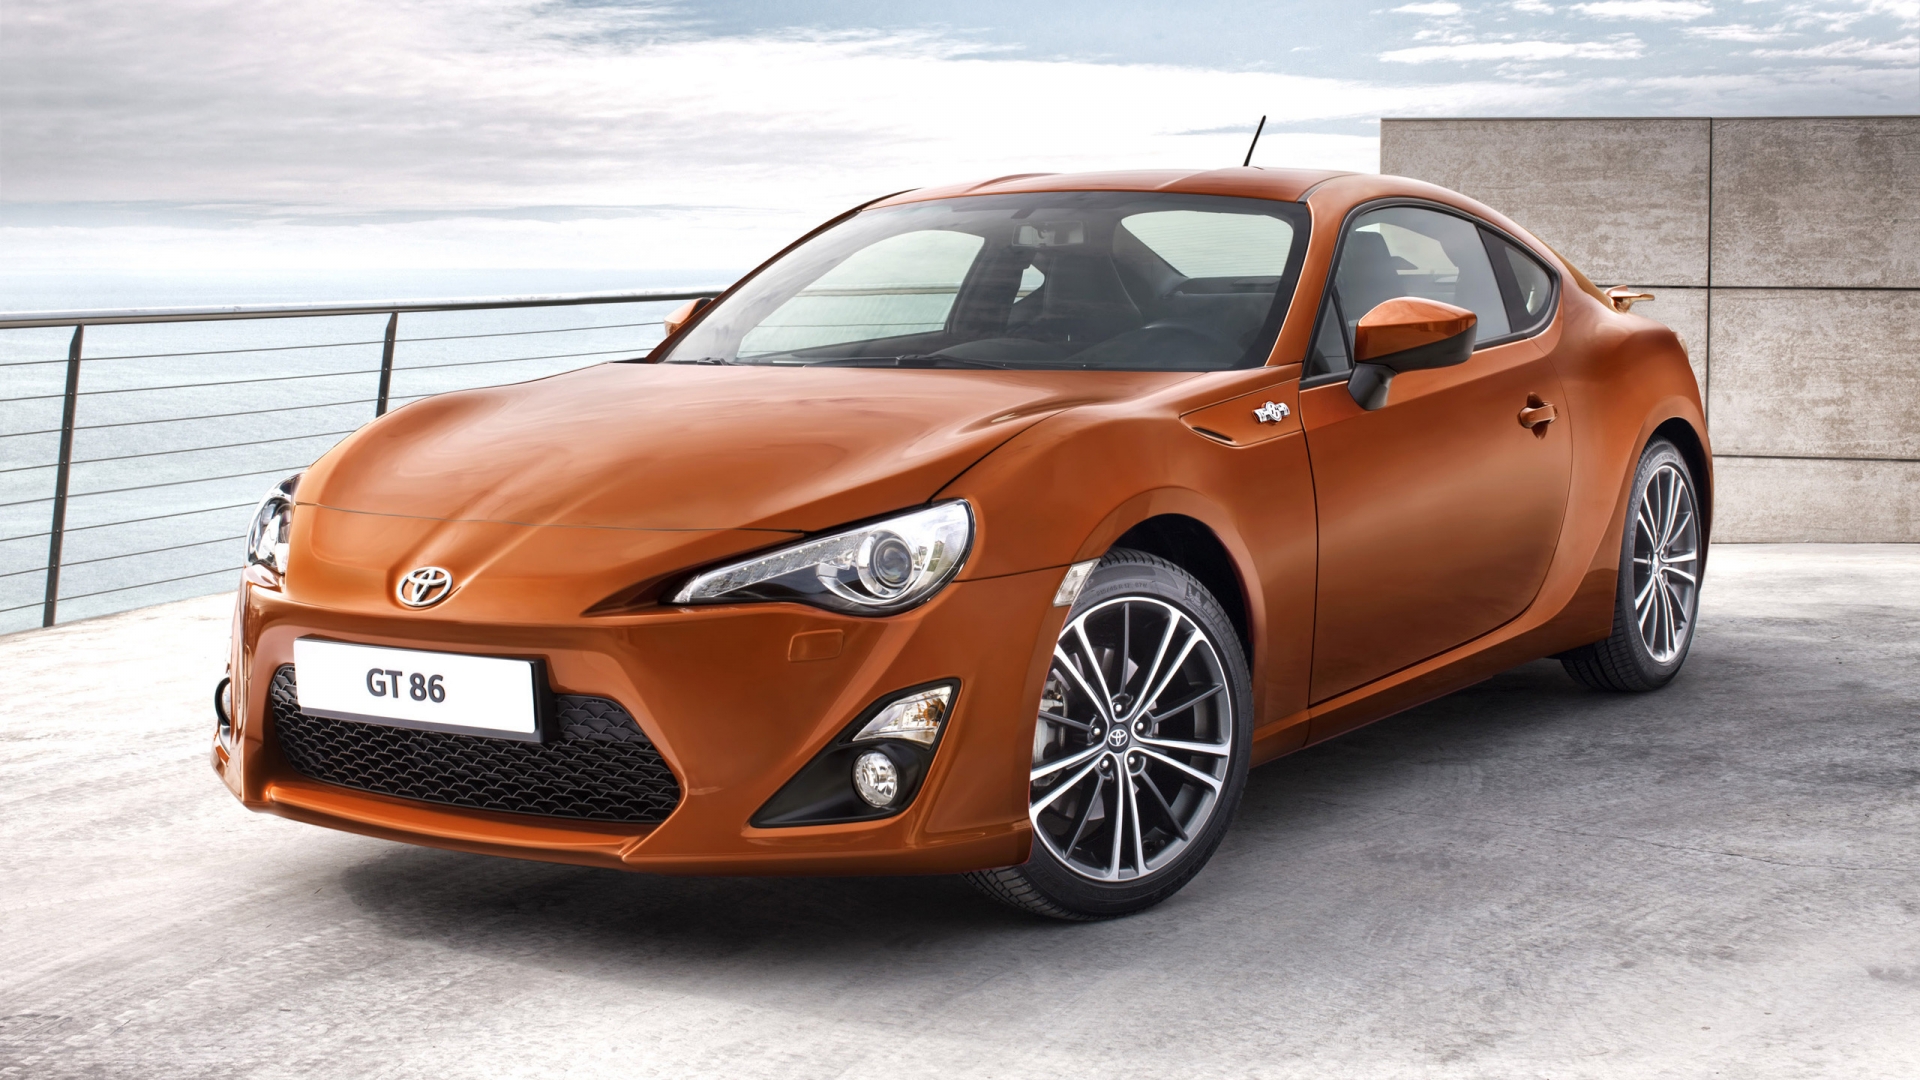 2012 Toyota GT 86 for 1920 x 1080 HDTV 1080p resolution